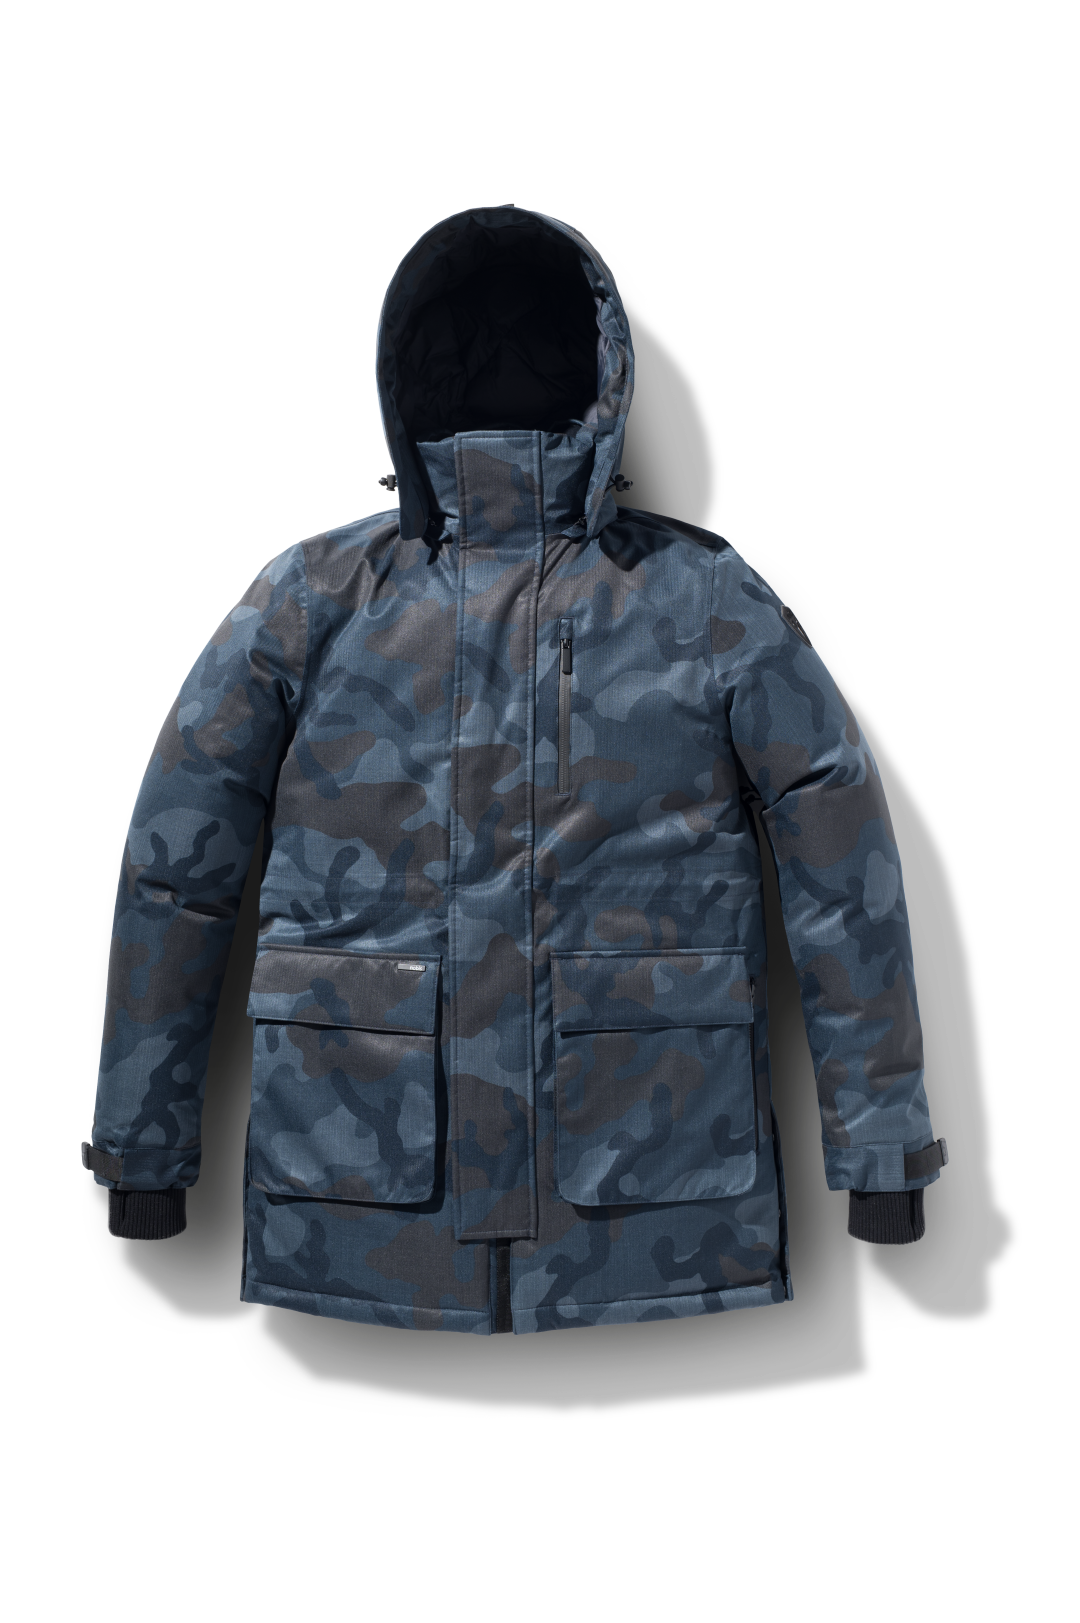 Mid weight men's down filled parka with two patch pockets at the hip and snap closure side vents in Navy Camo